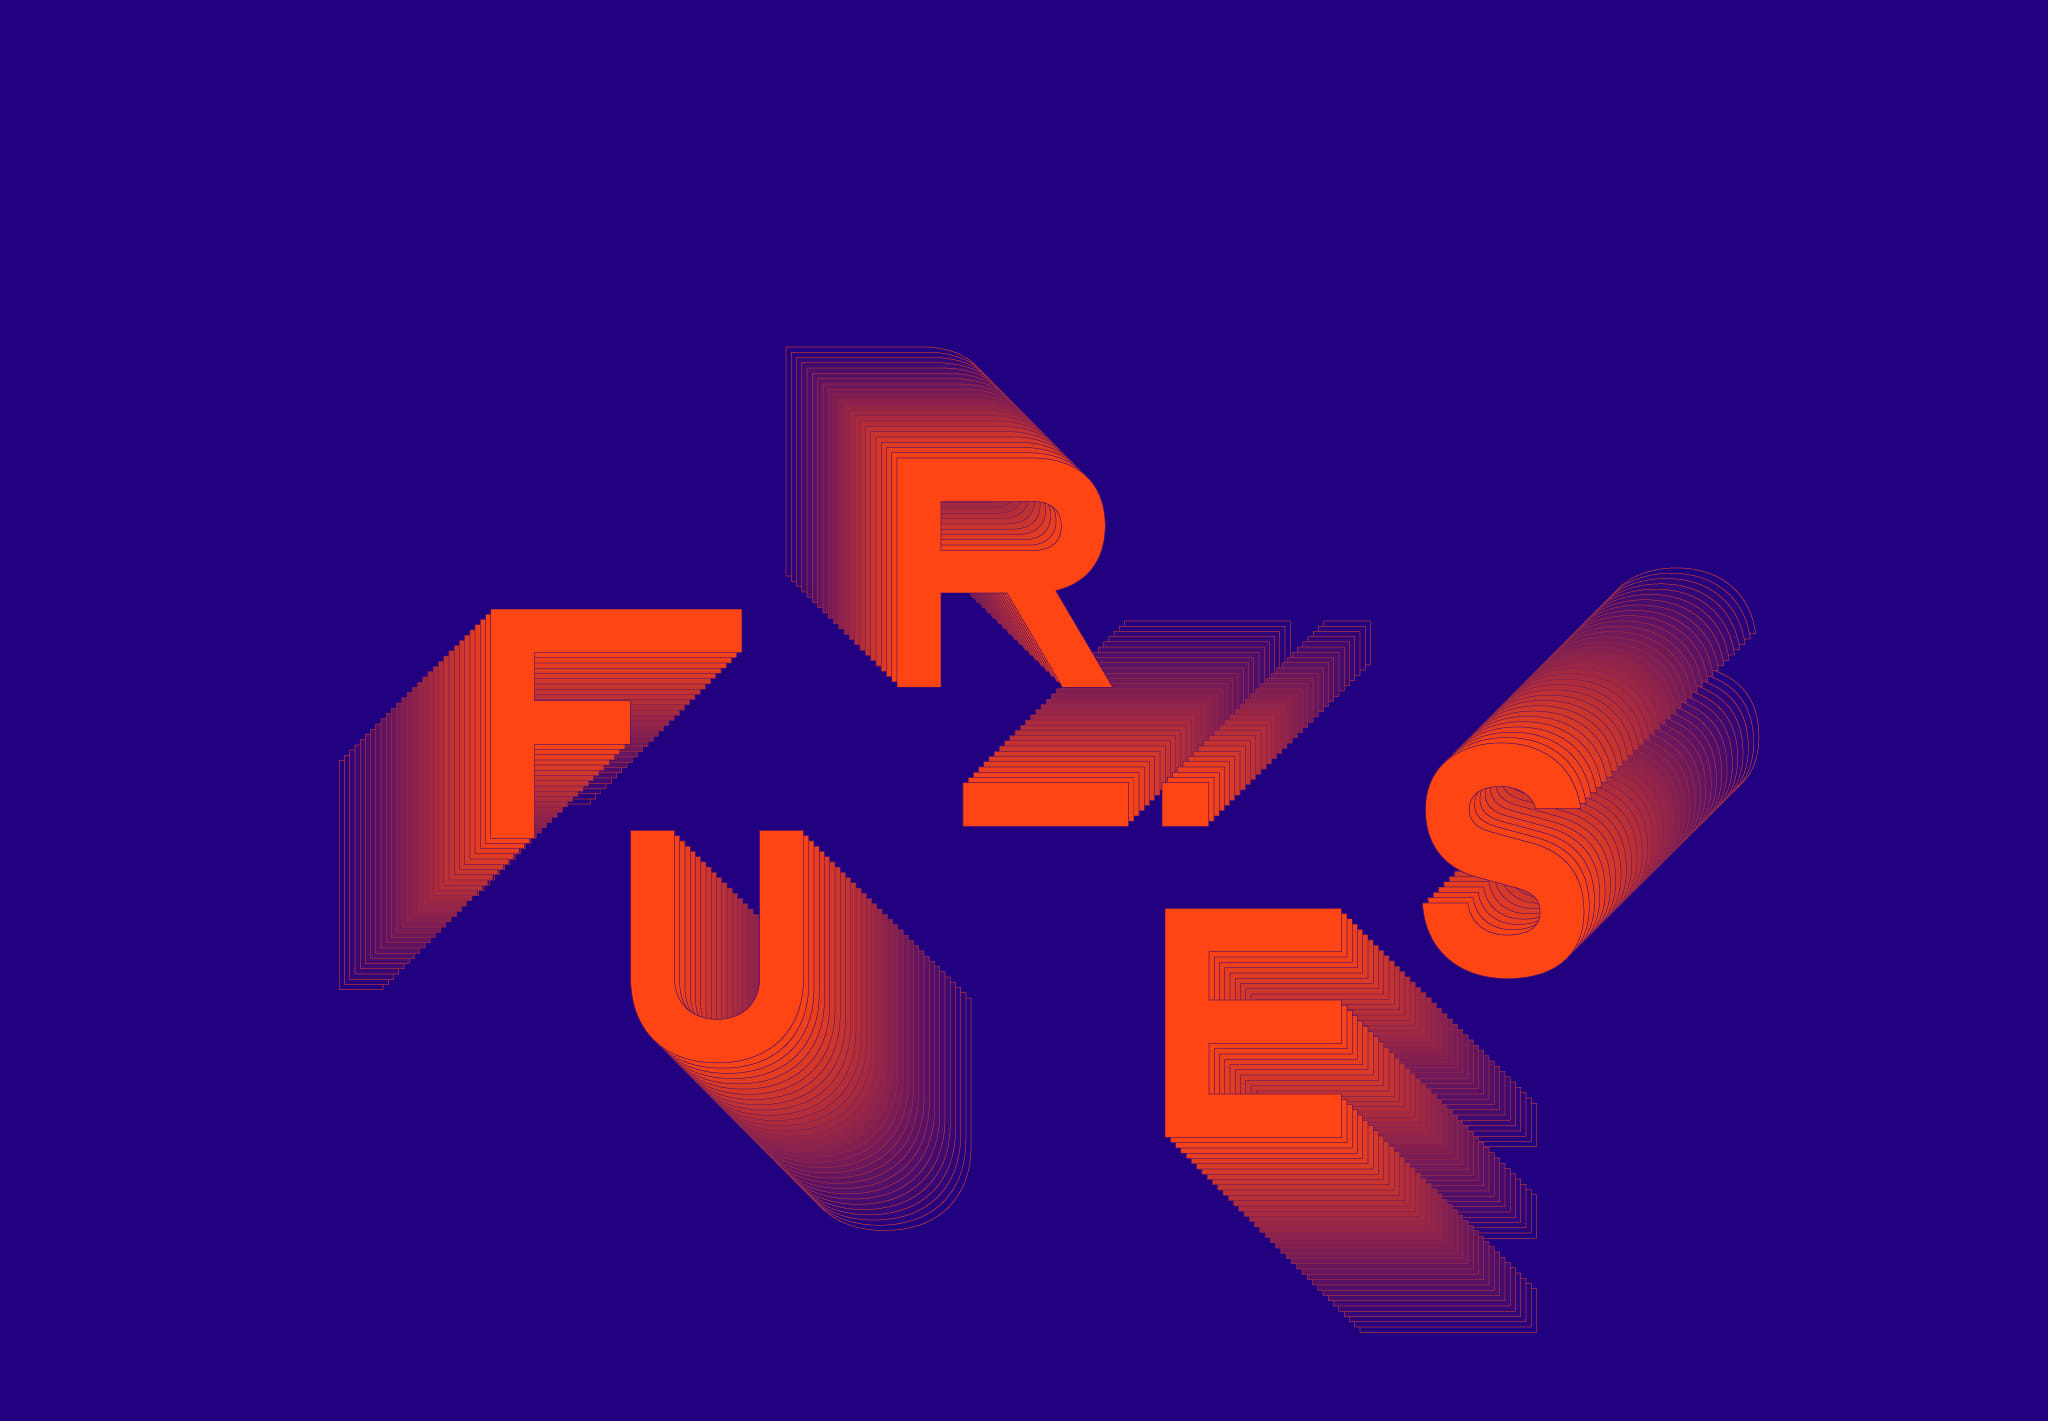 Preview of Furies’s identity